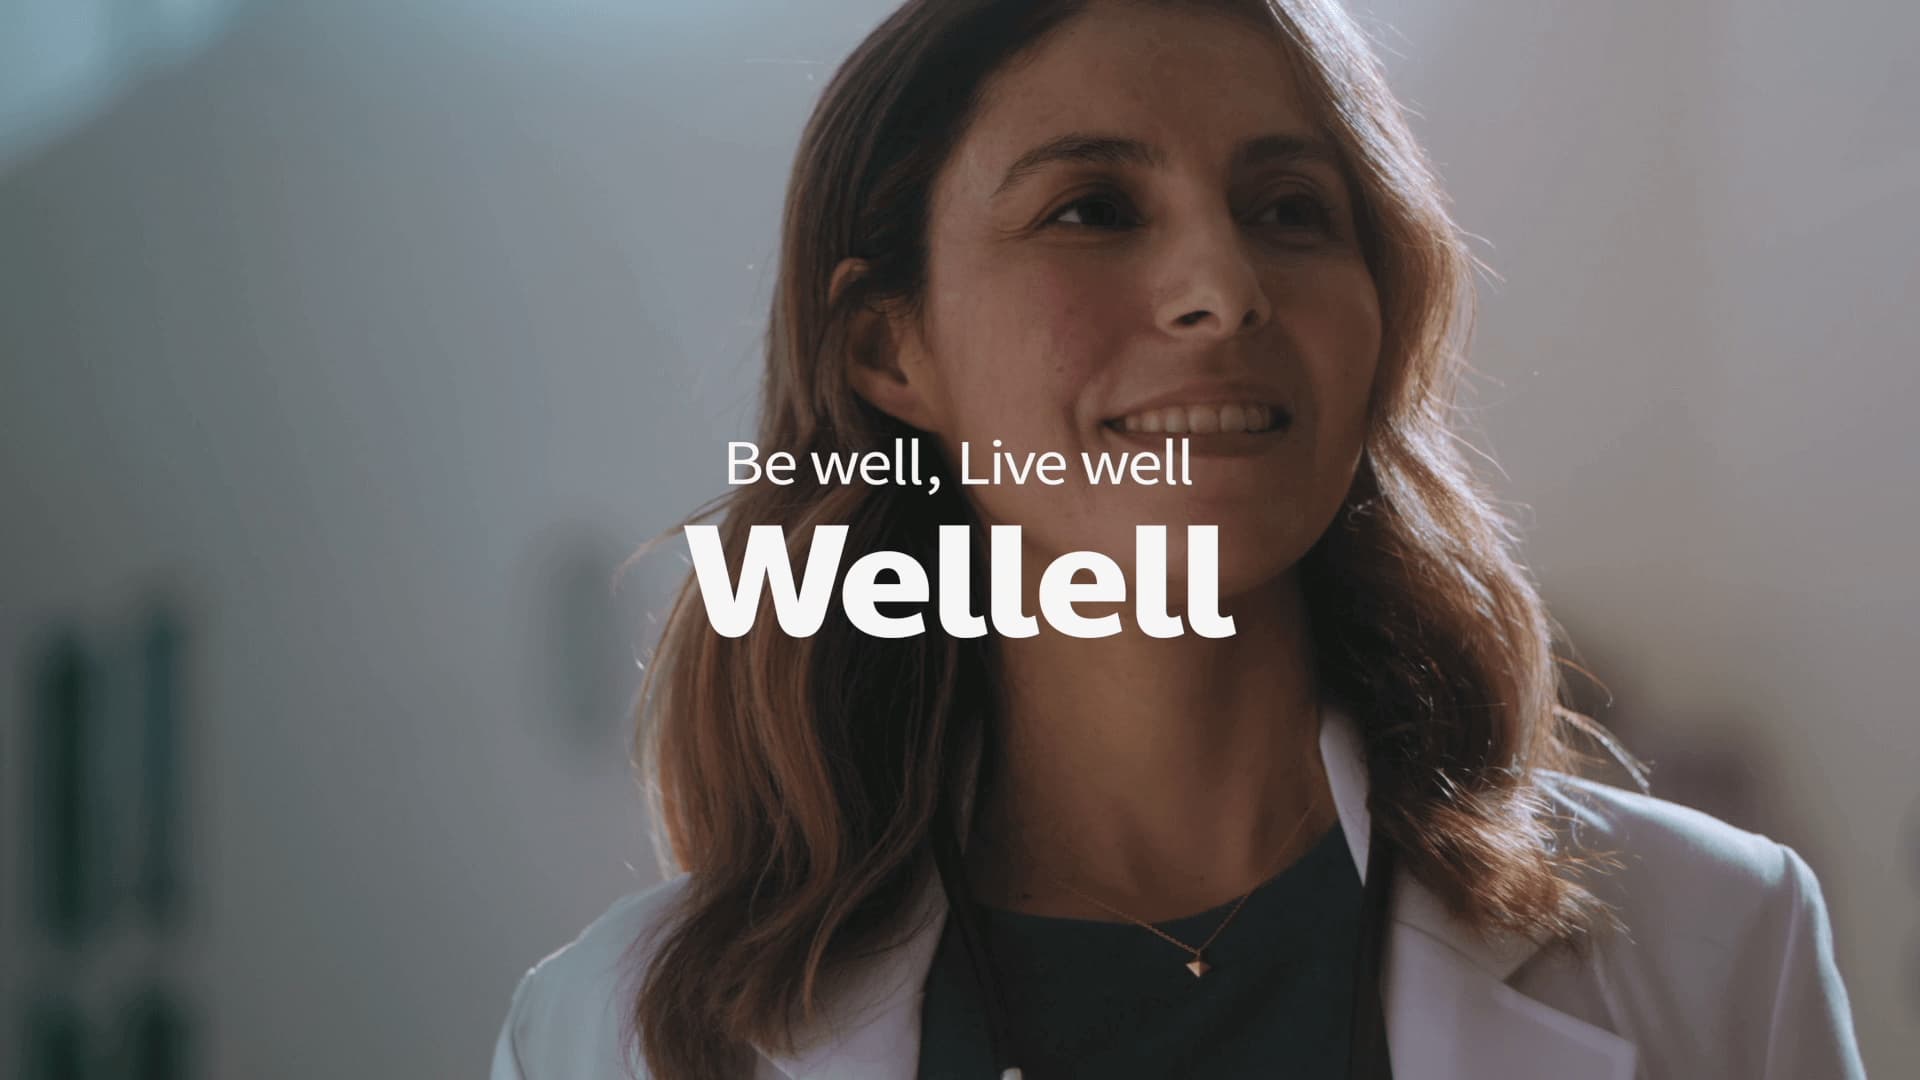 Life, Joy, and Well-Being are Wellell's Source of Motivation.